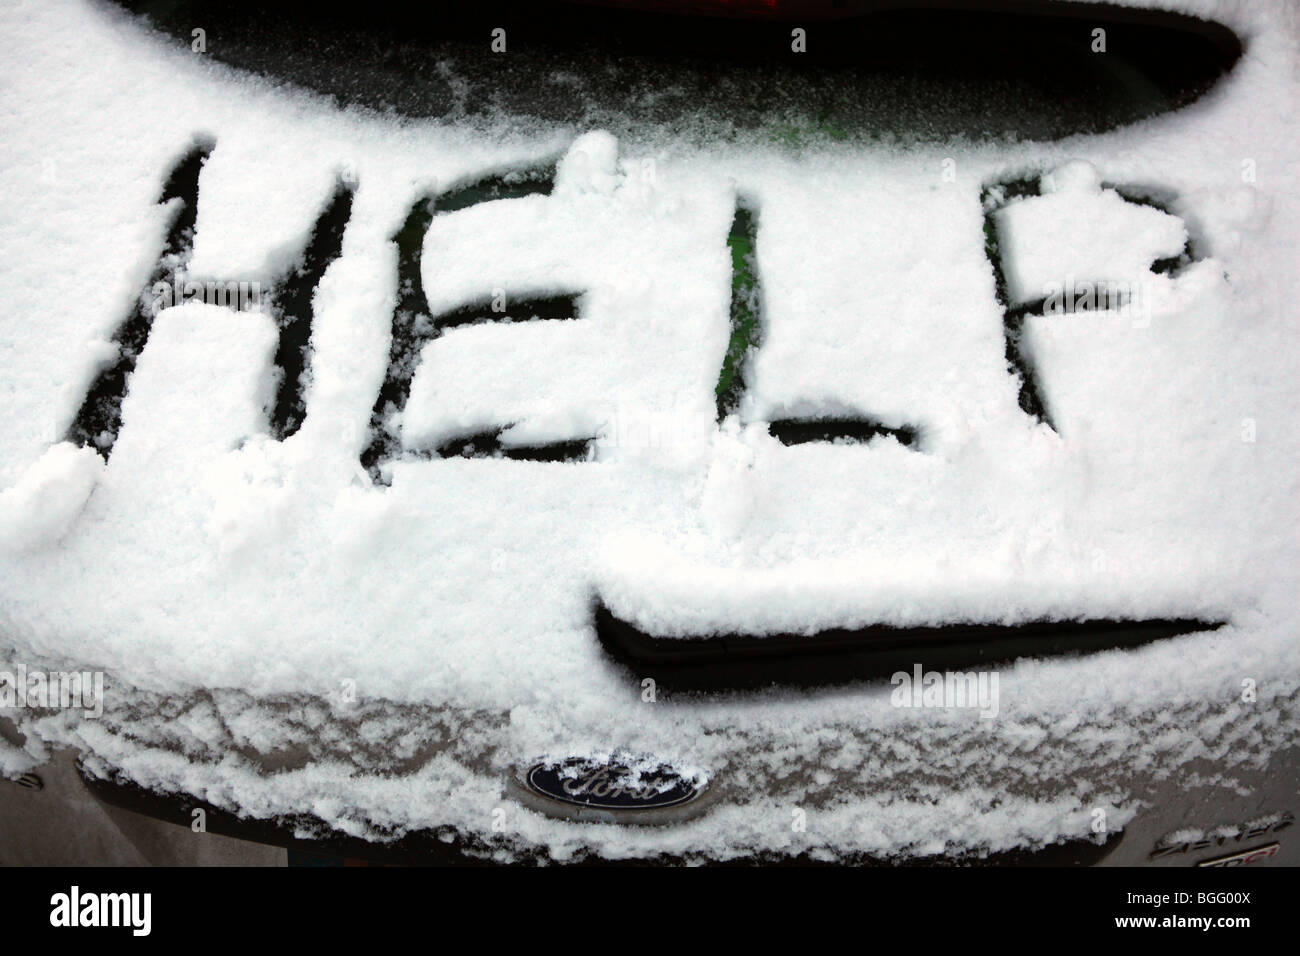 A car stranded in severe Winter weather conditions with the word help written on the snow during the Big Freeze of 2010 Stock Photo